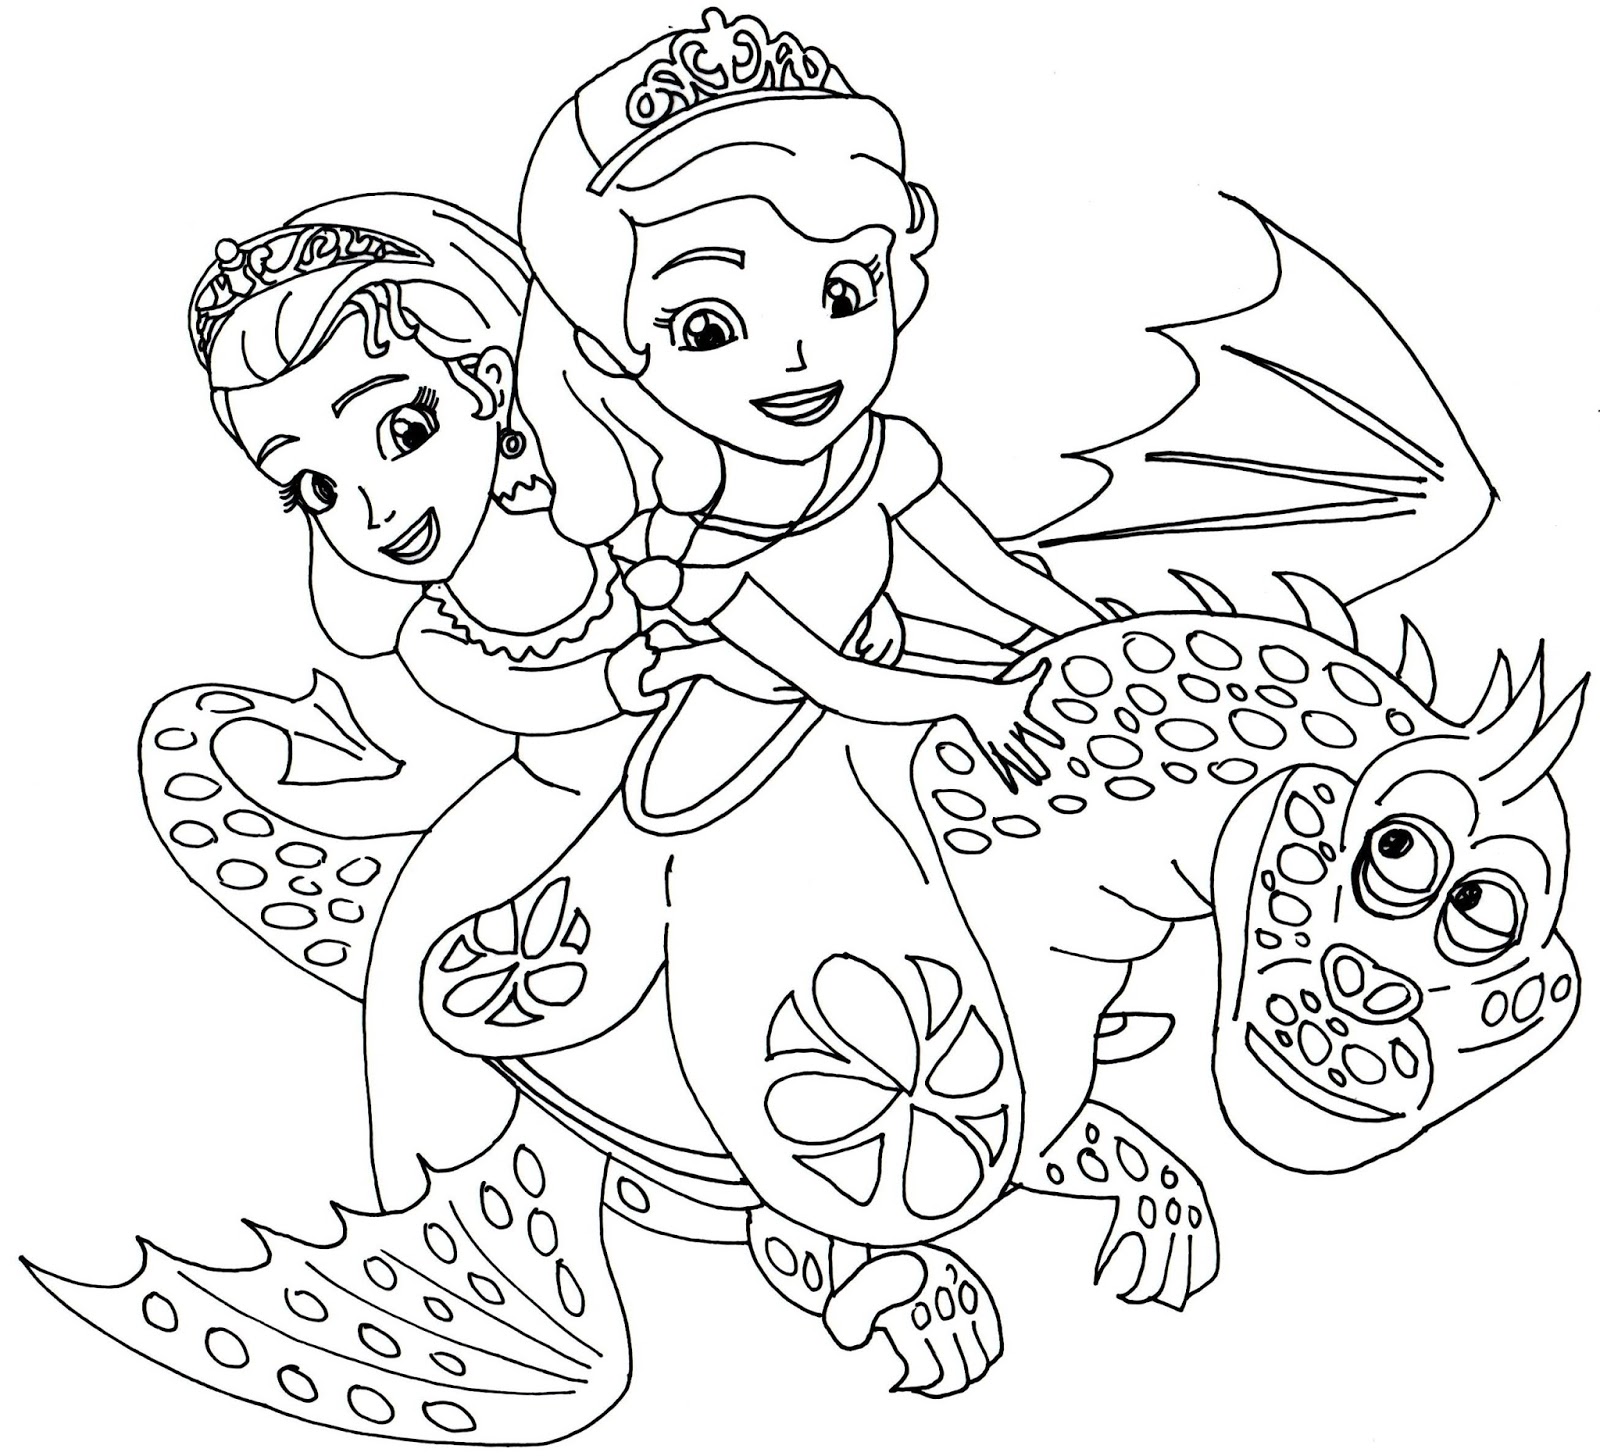 Sofia The First Coloring Pages December 2015